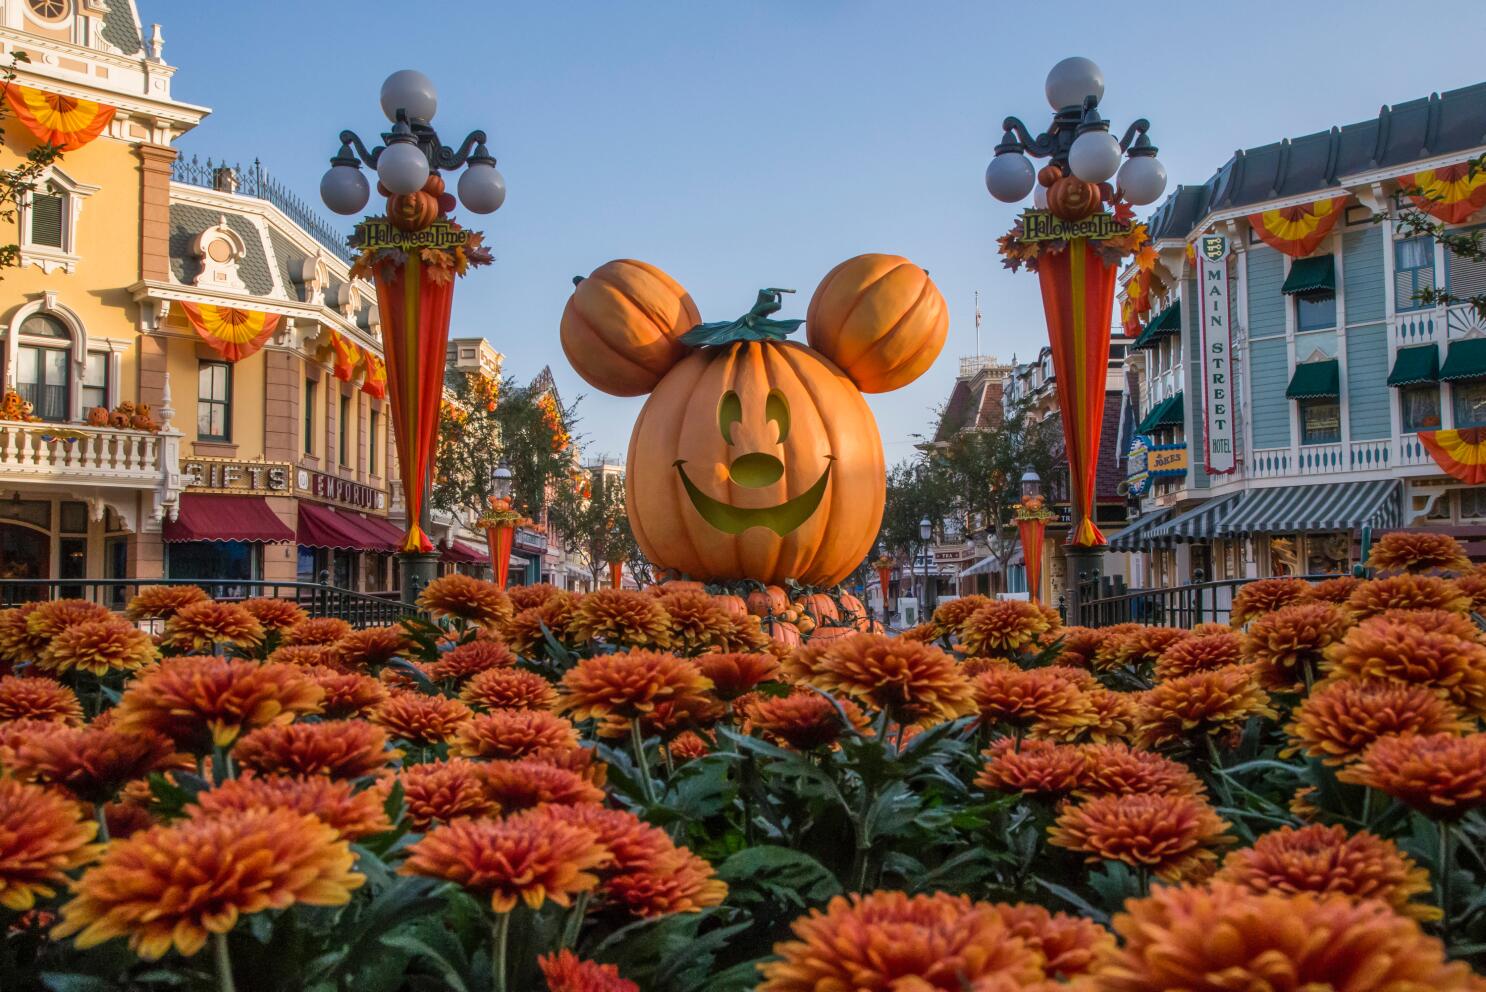  Paper Die Cuts - A Magical Halloween - for Disneyland